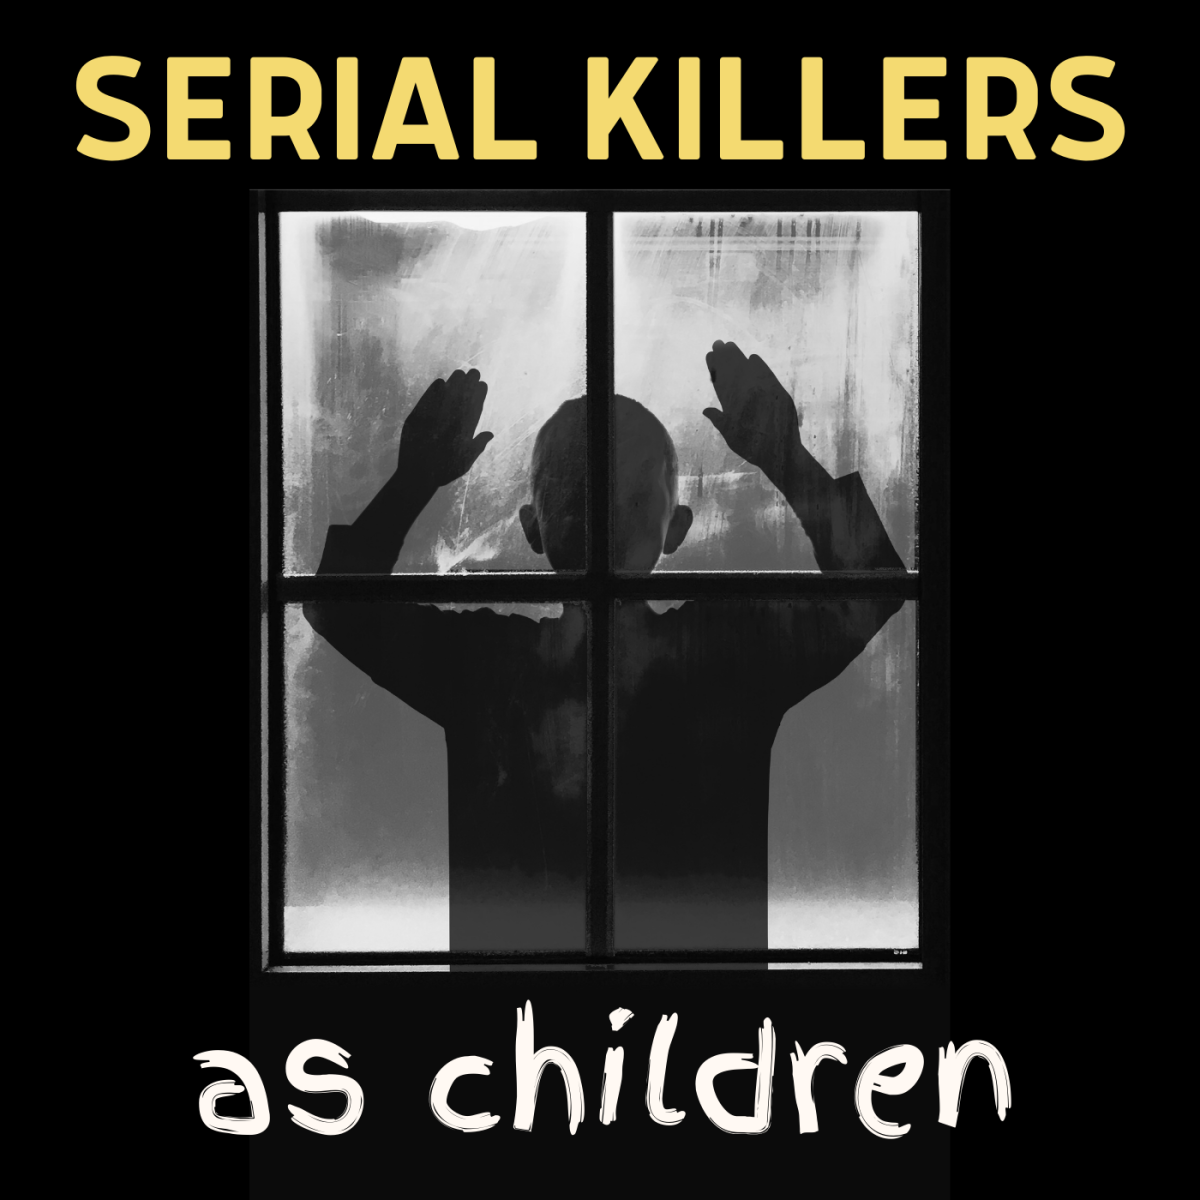 7 Childhood Photos of Serial Killers